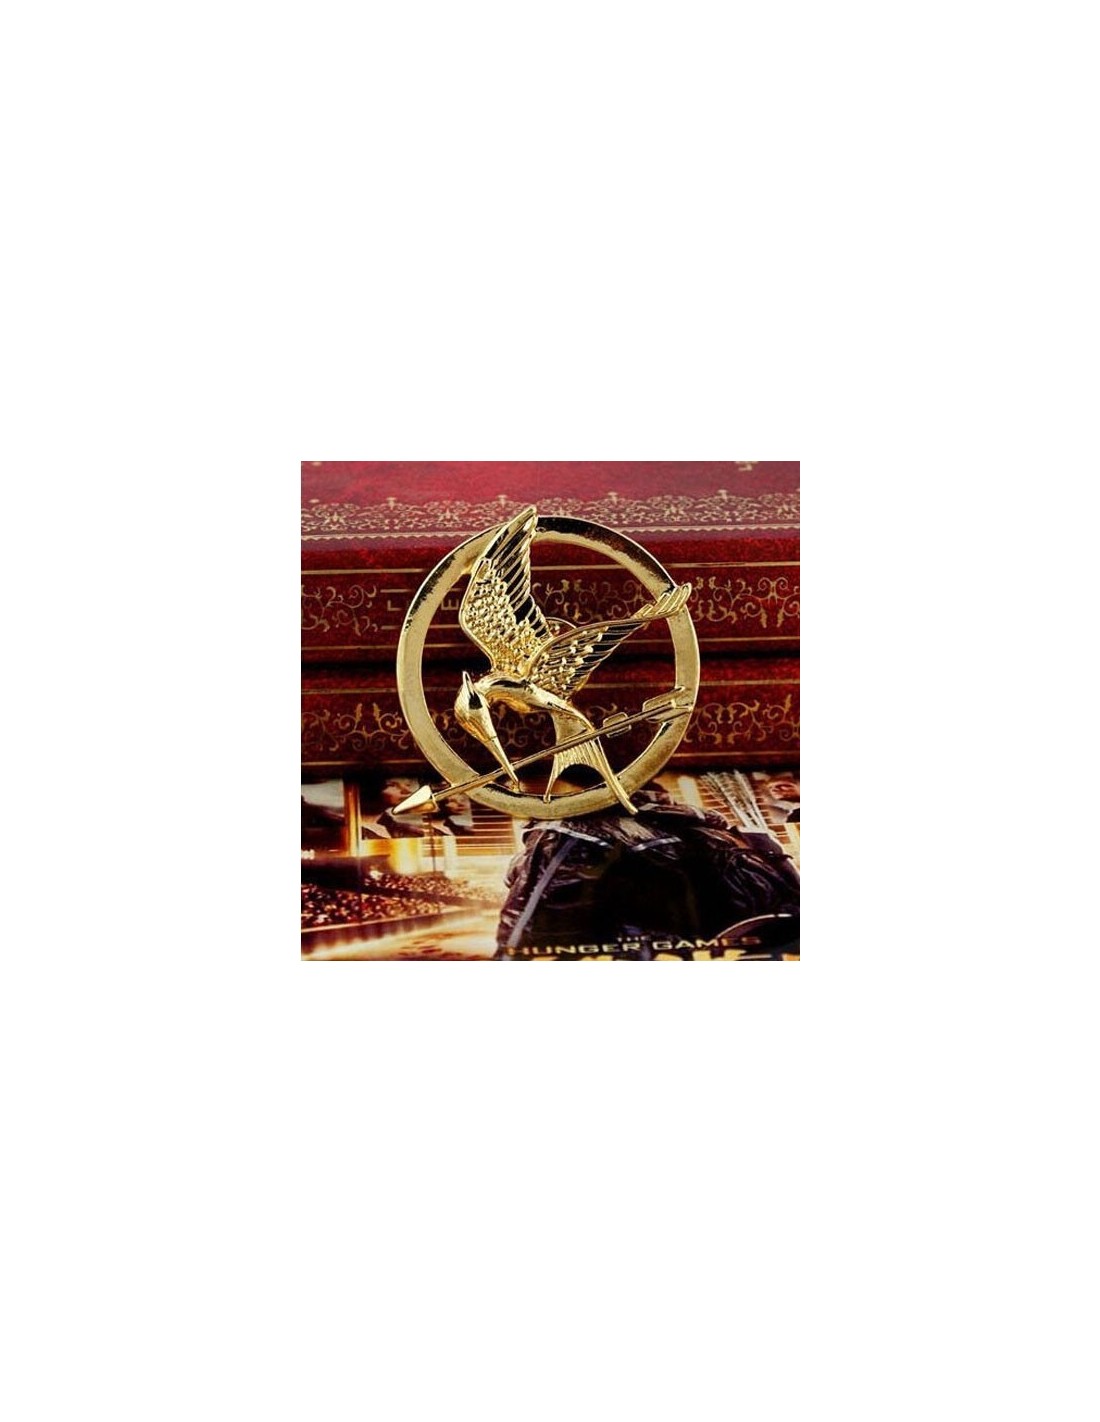 Broche style Hunger Games